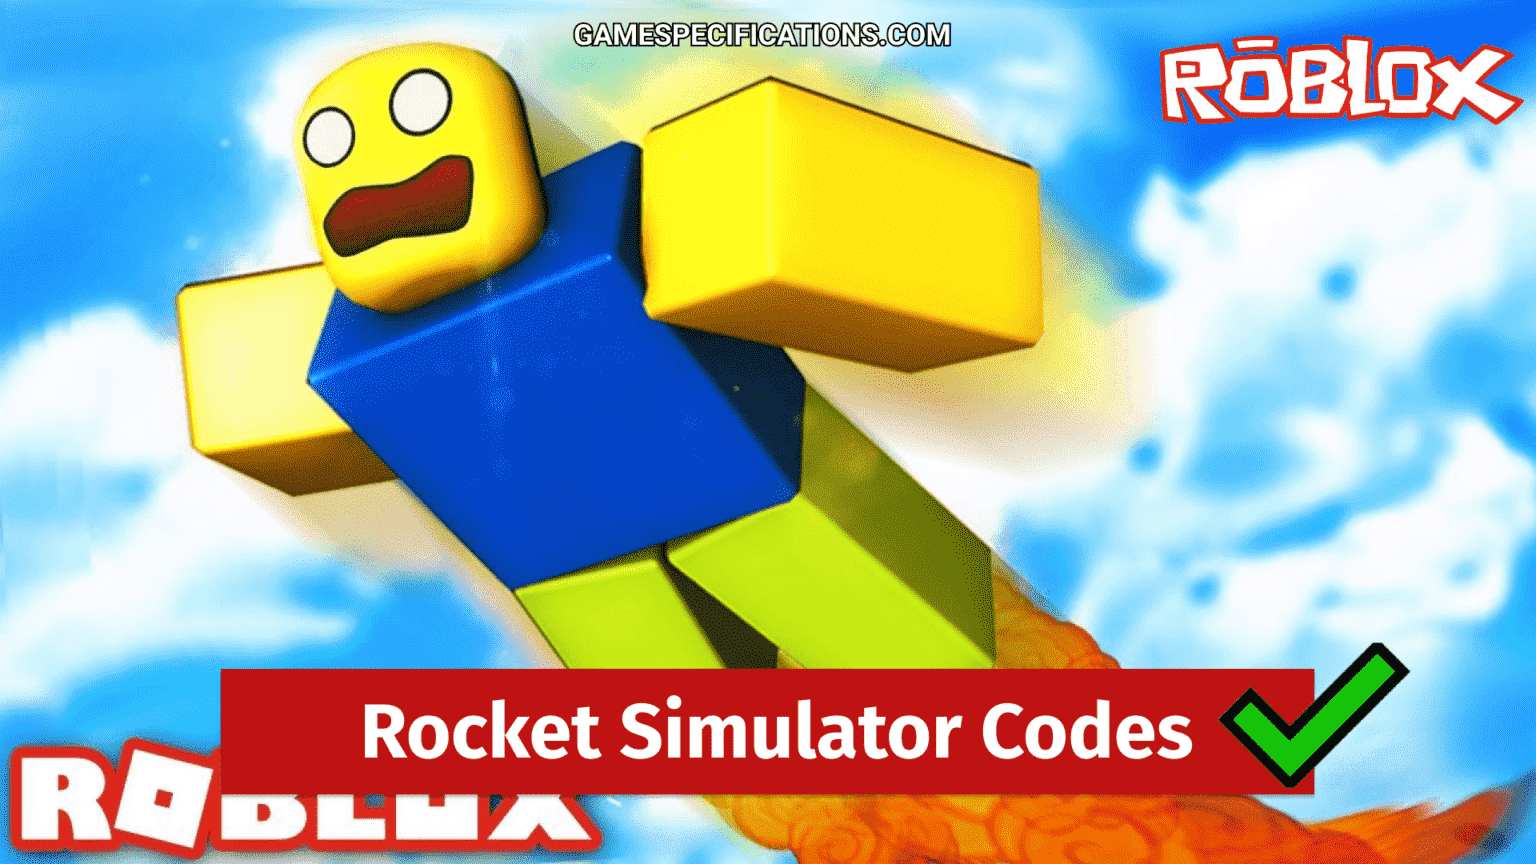 All Twitter Codes For Rocket Simulator